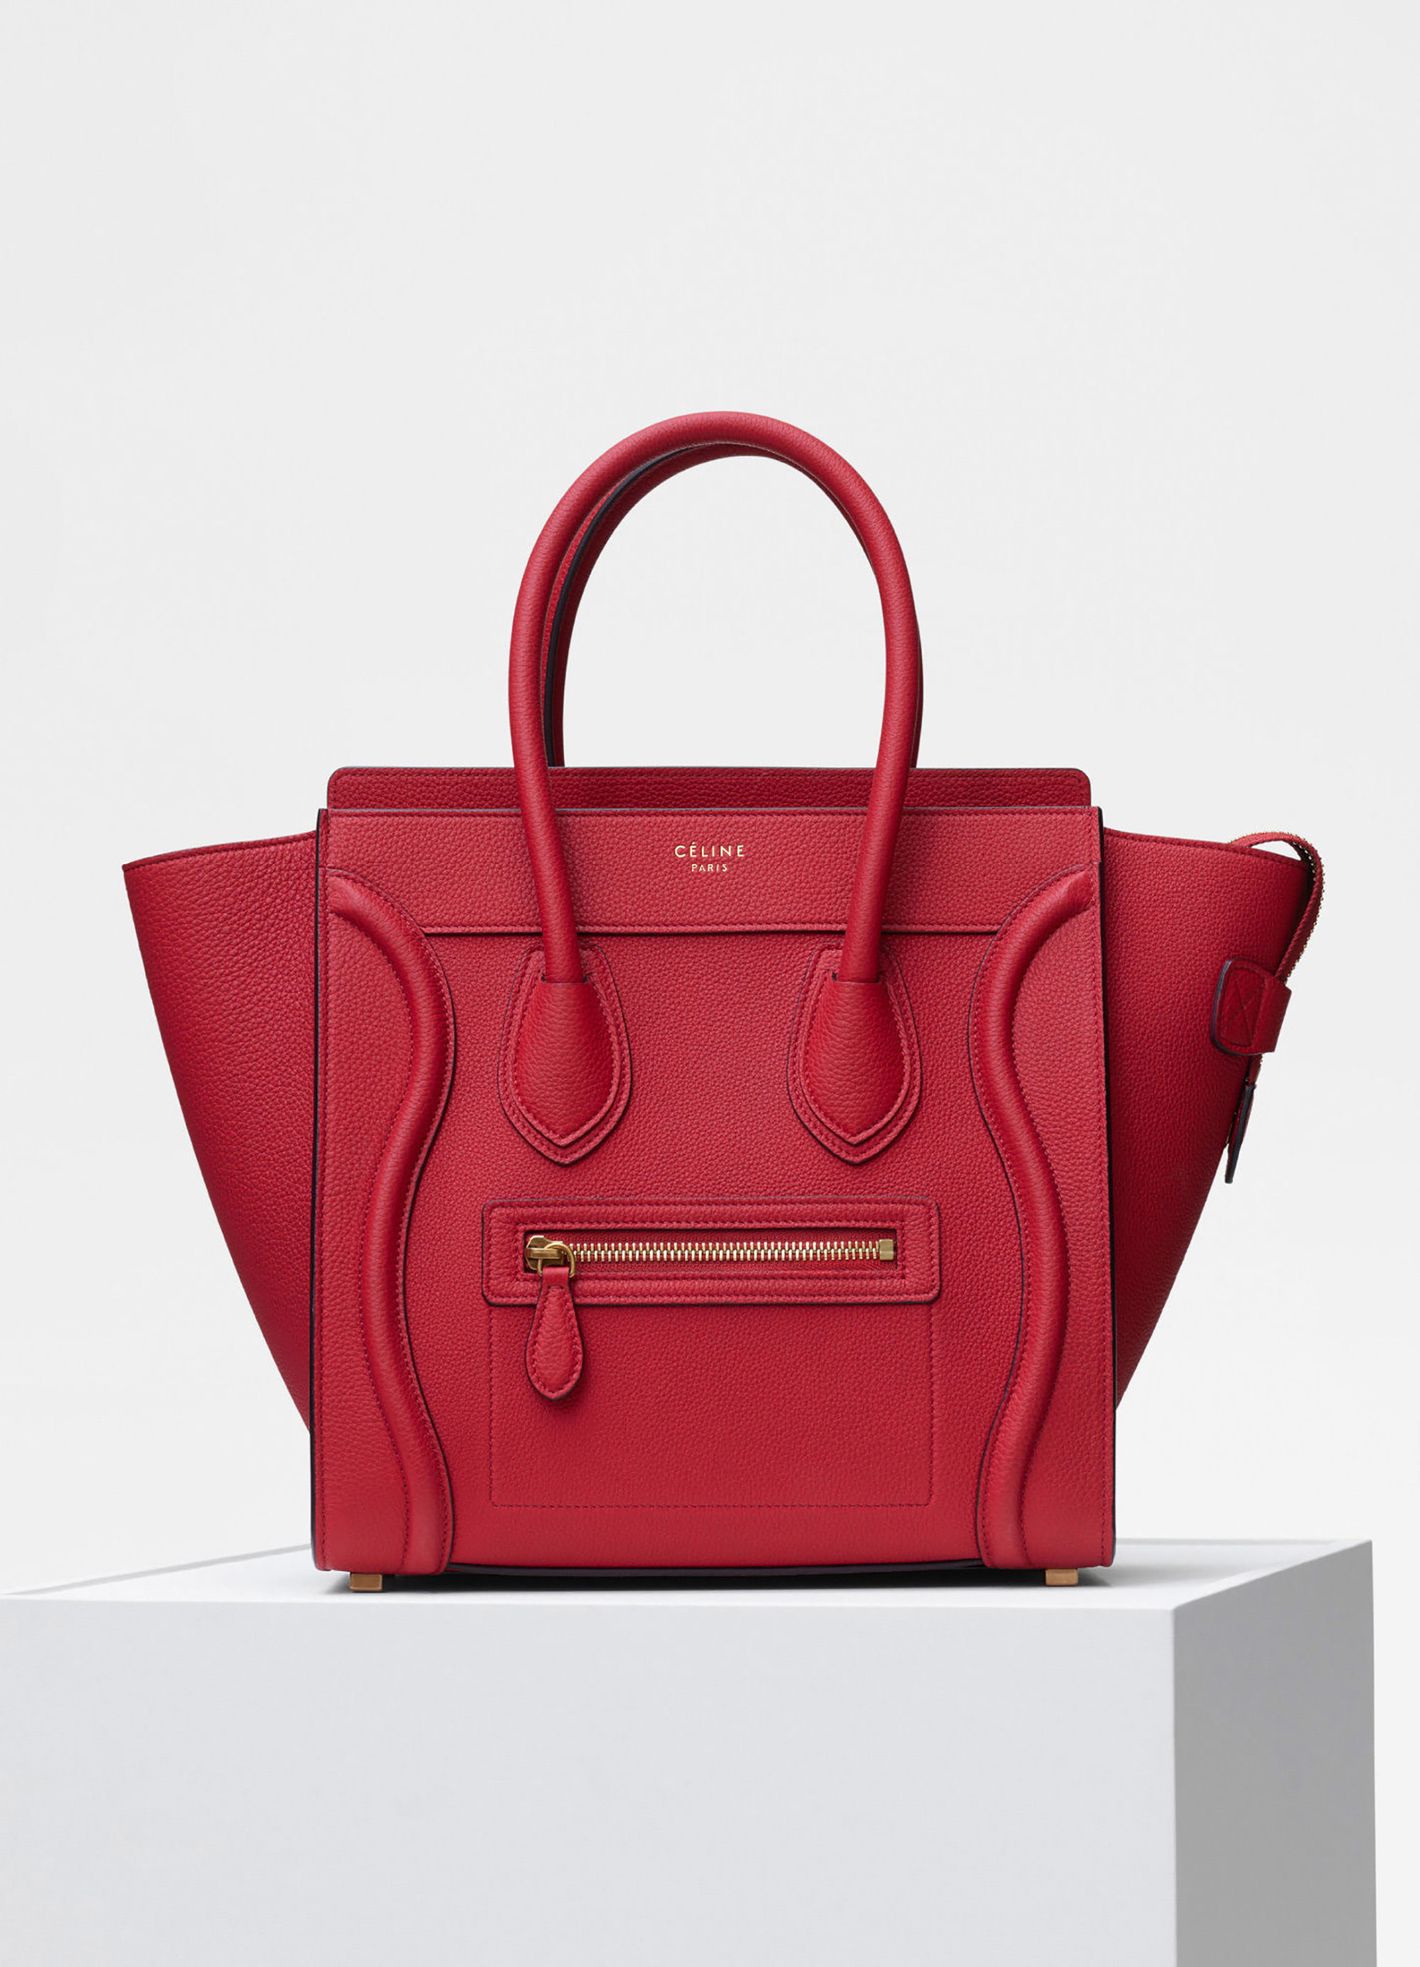 Shoppers love the Celine lookalike bag for a fraction of the price -  Netmums Reviews